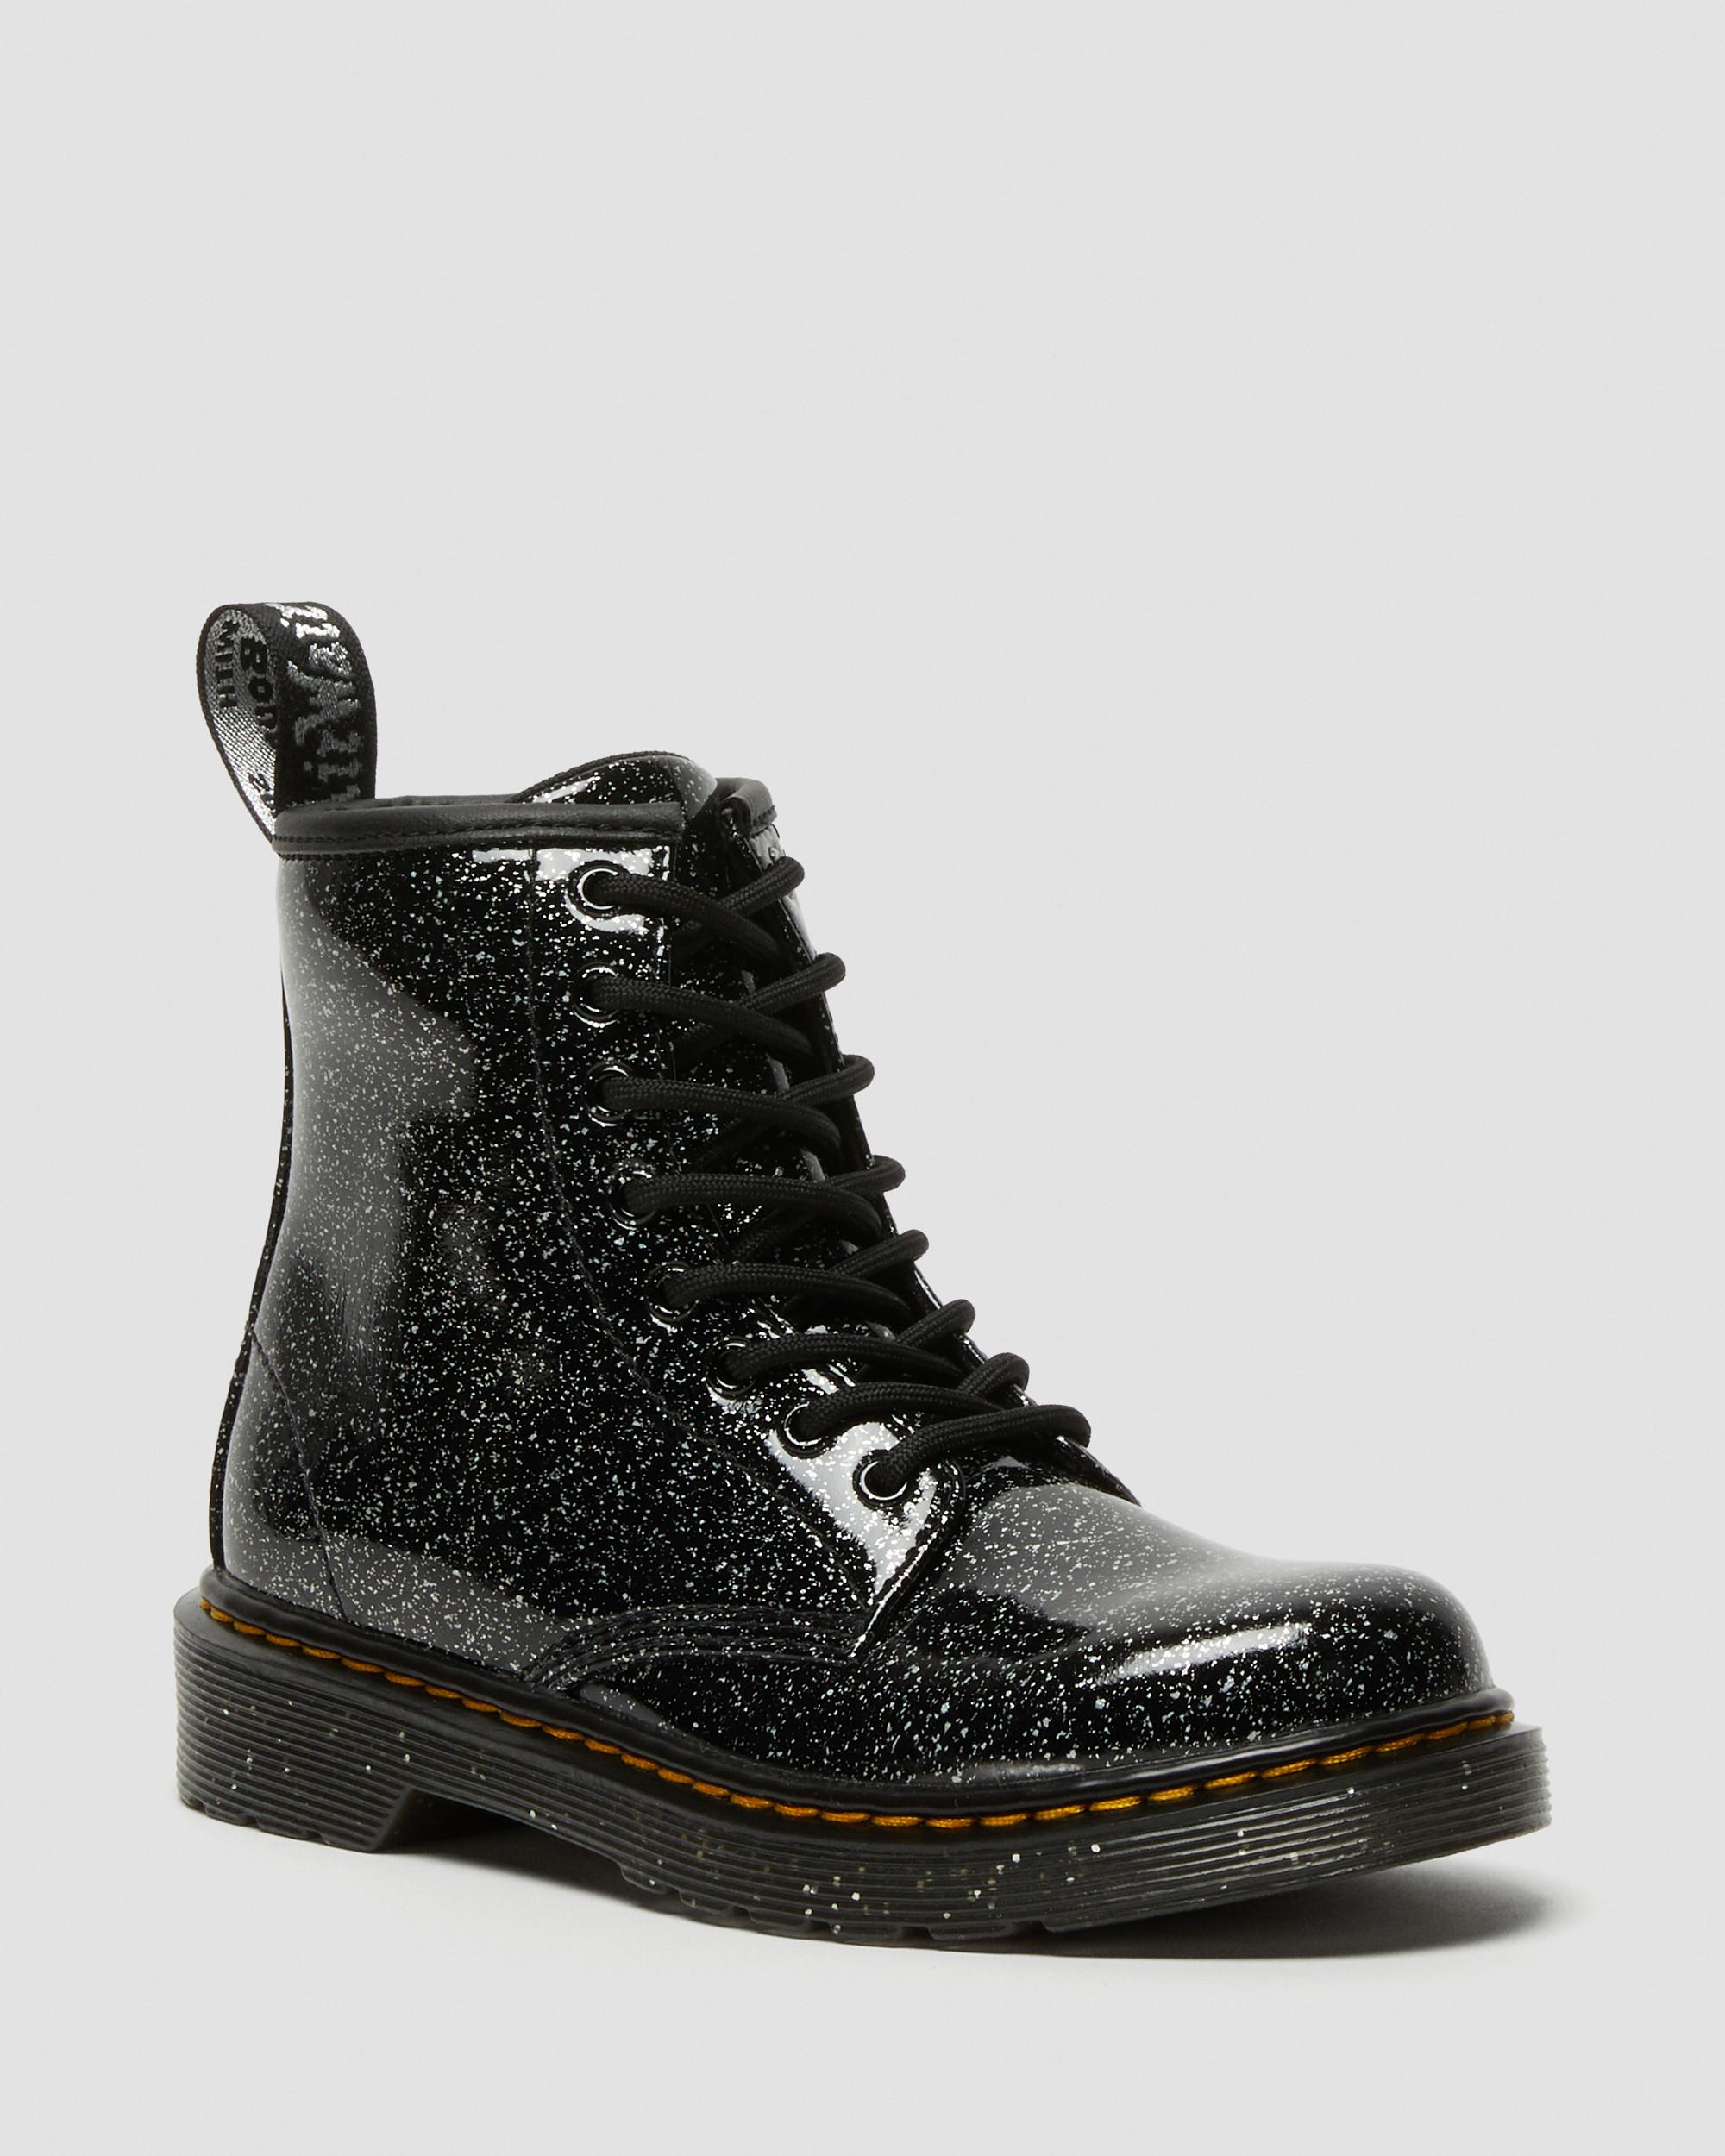 Junior 1460 Softy T Leather Lace Up Boots in Black | Dr. Martens